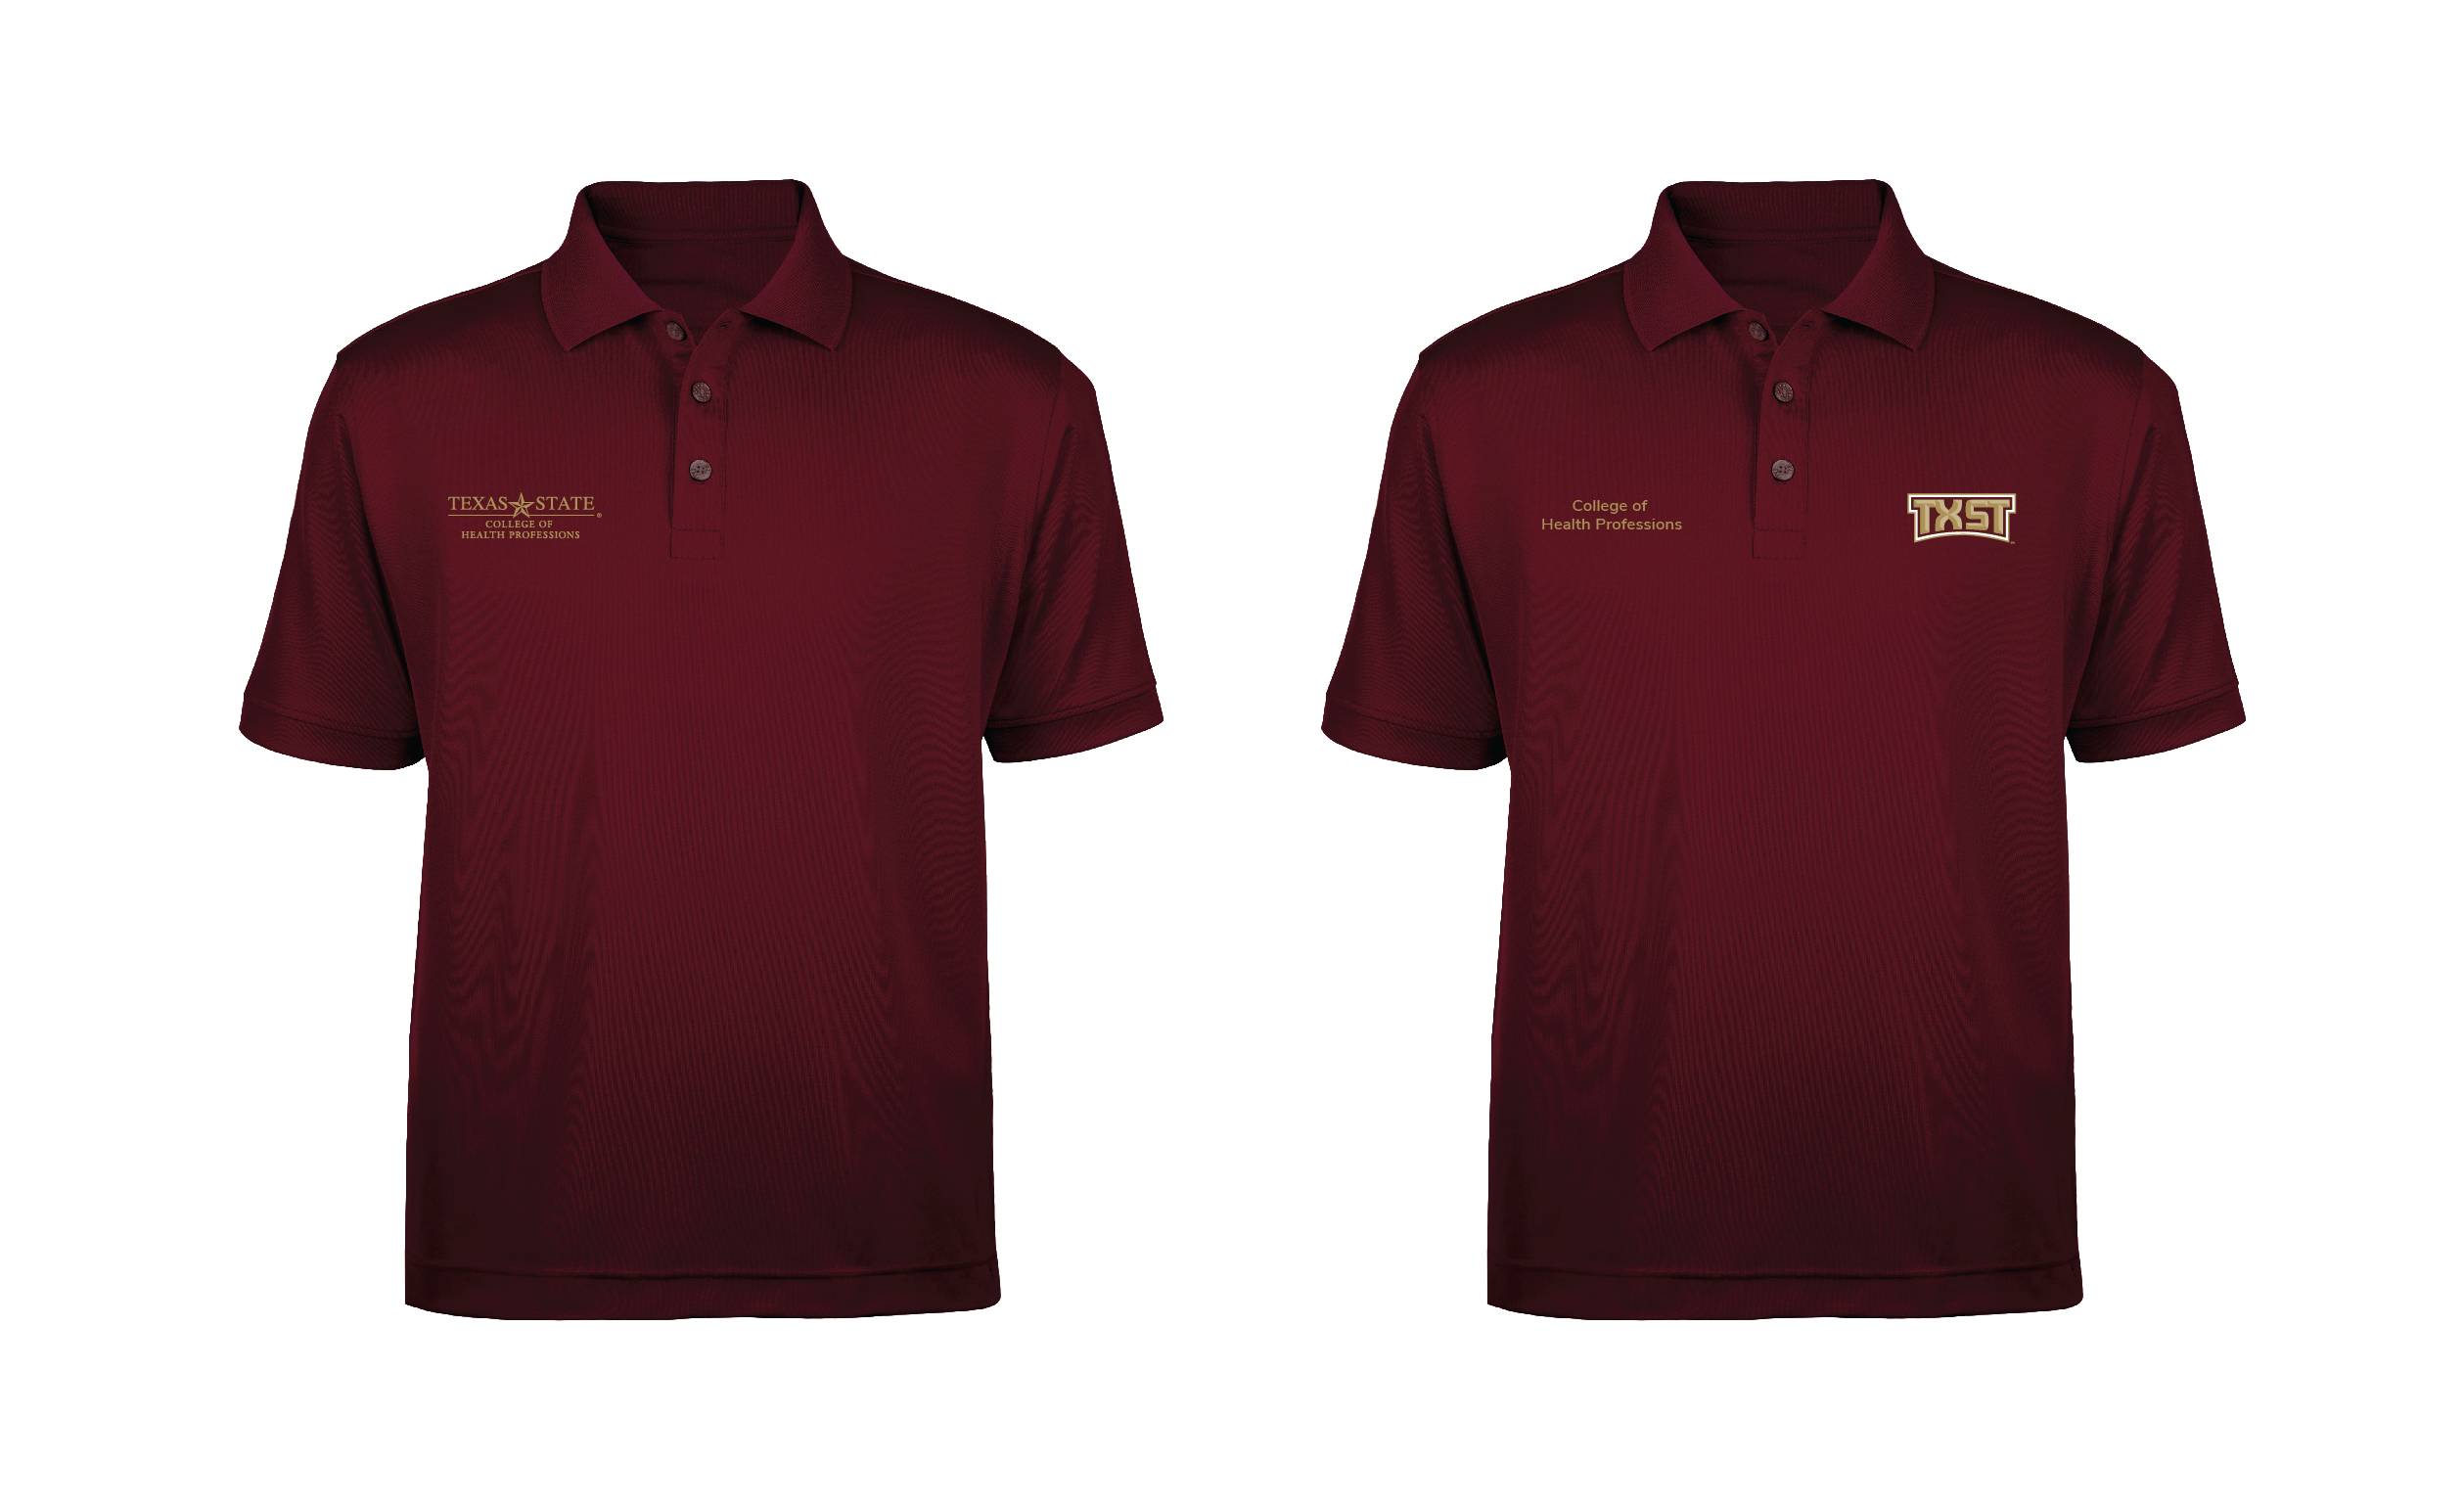 One polo has a College of Health Professions logo on the left side of the shirt. Another polo has a TXST logo on one side with “College of Health Professions” spelled out on the other side.